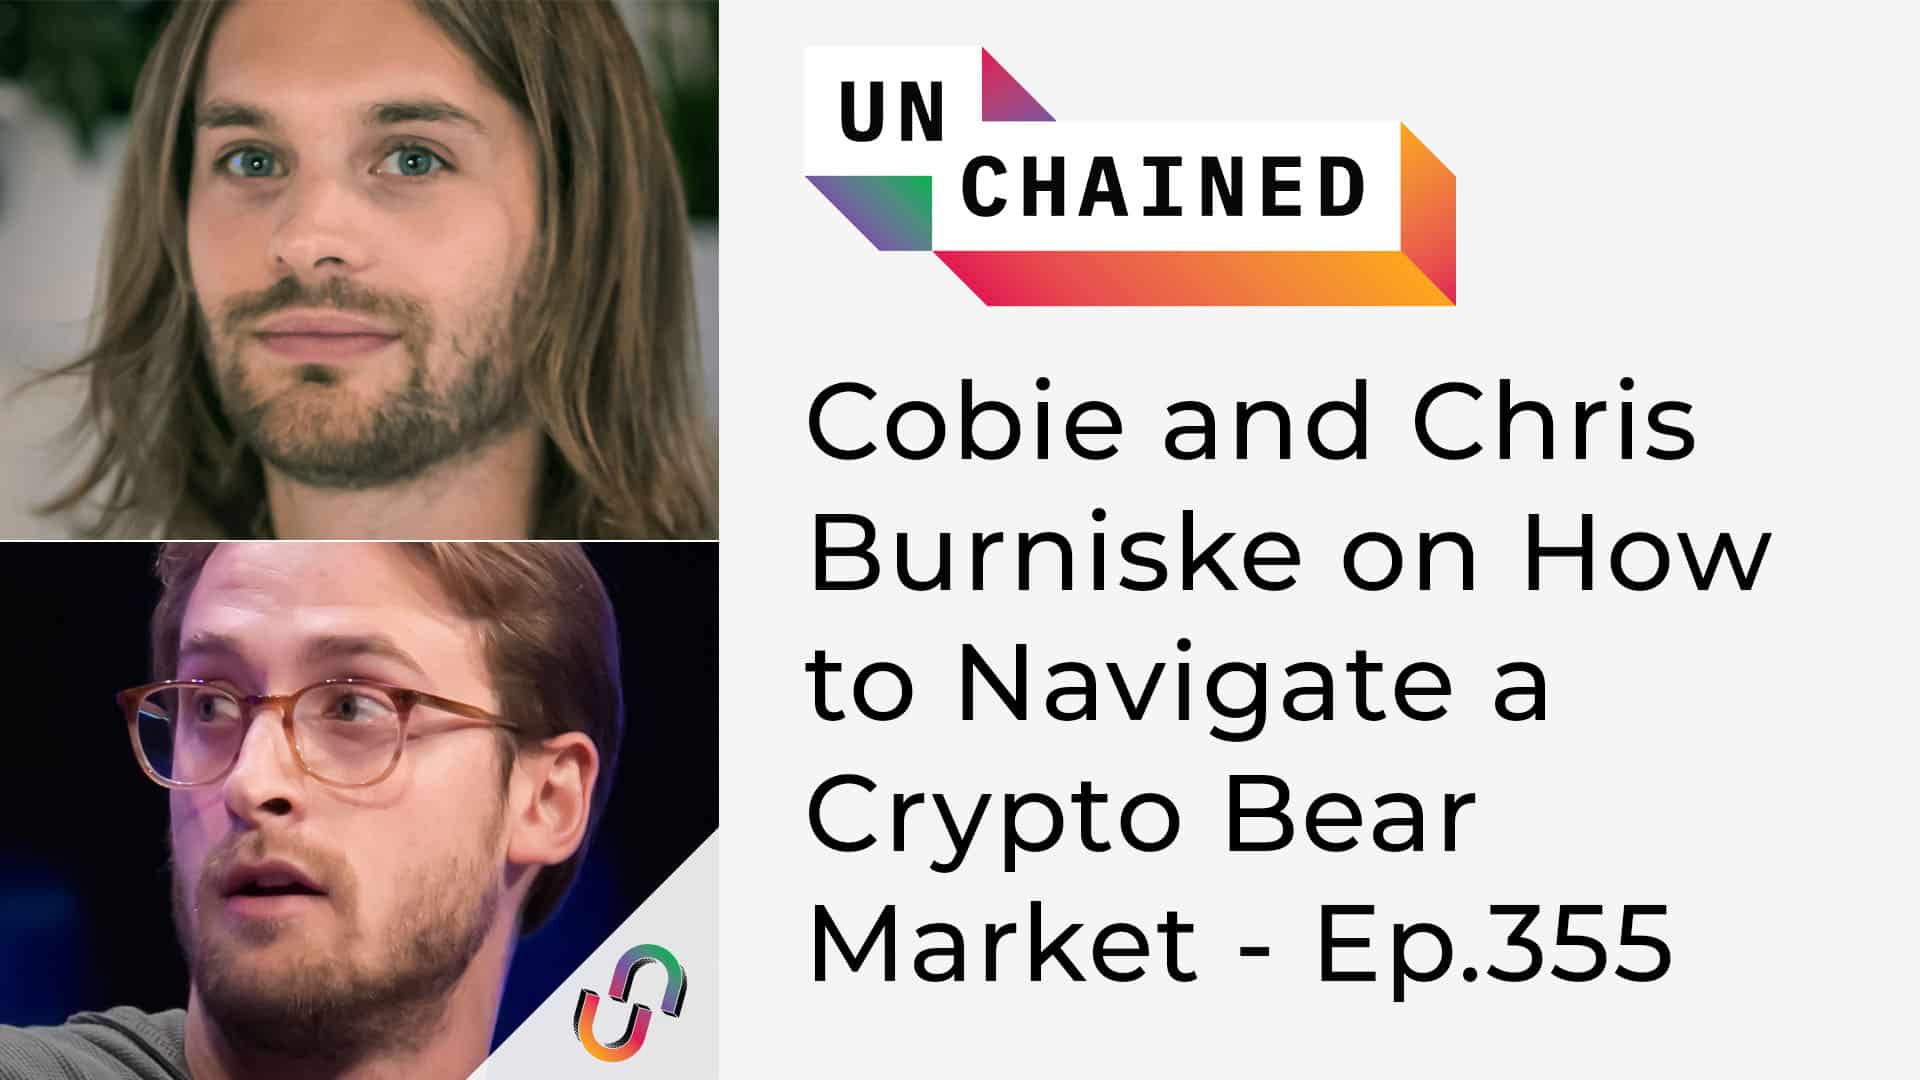 Unchained - Ep.355 - Cobie and Chris Burniske on How to Navigate a Crypto Bear Market